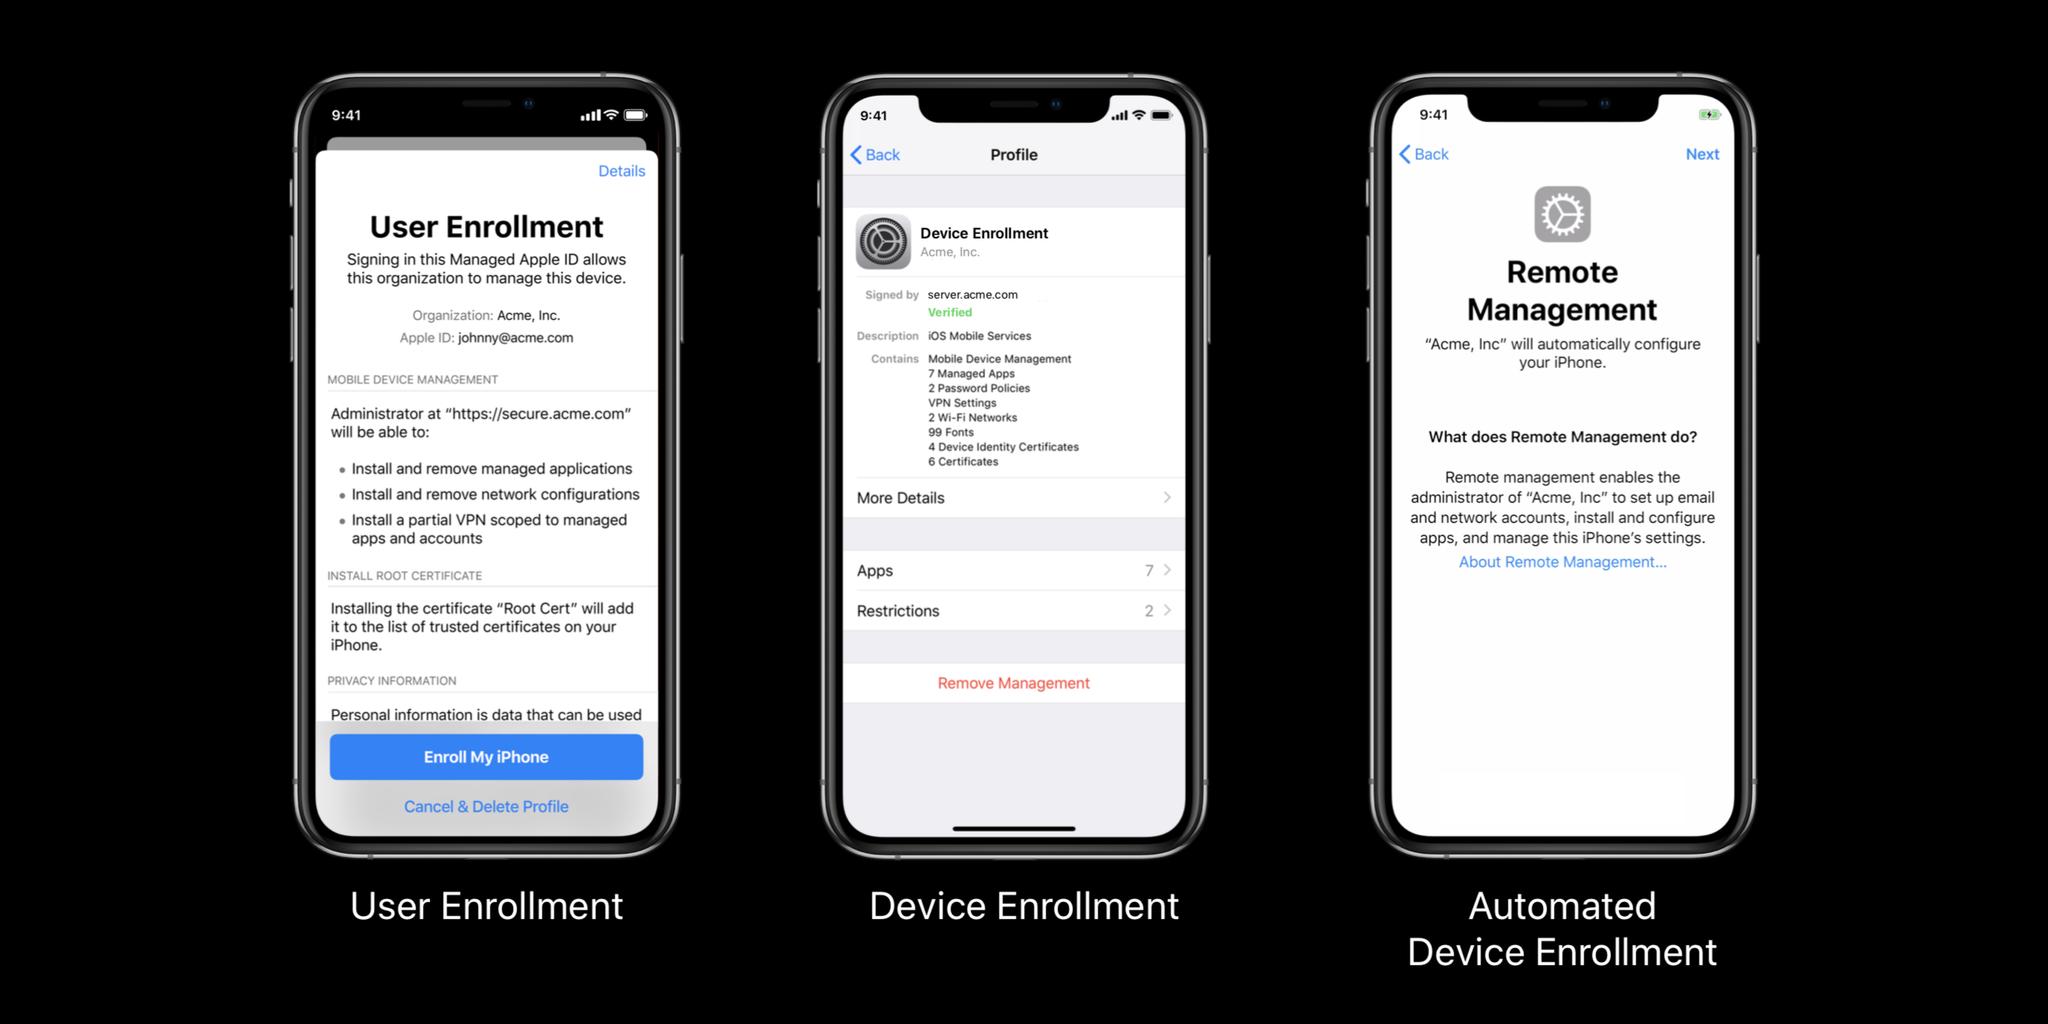 The New iOS 13 Reminders App Is Now Available on the Web